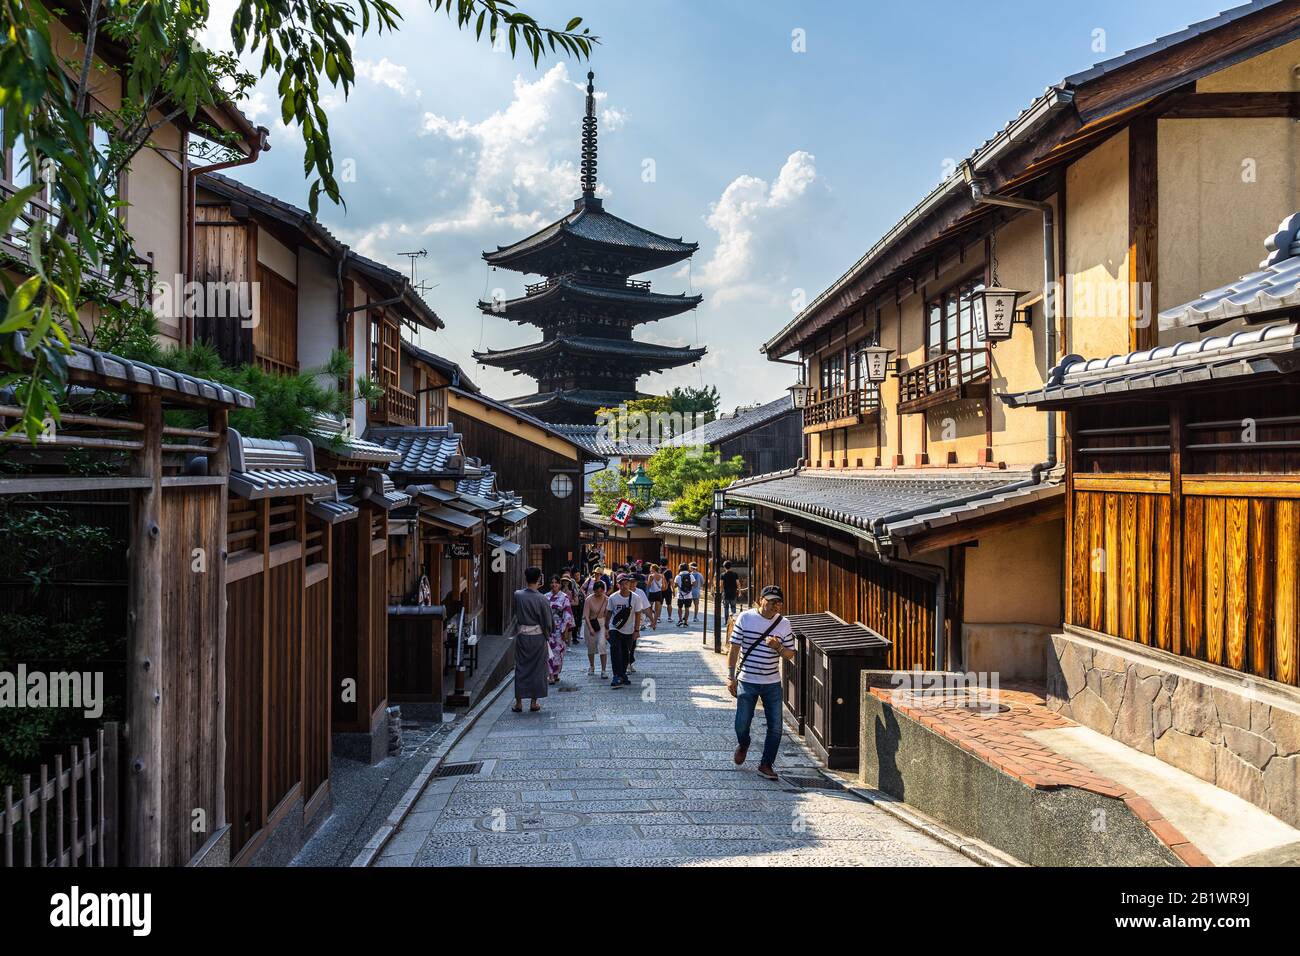 A street of Higashiyama, the most famous historic district of Kyoto with Yasaka pagoda in the background. Kyoto, Japan, August 18, 2019 Stock Photo